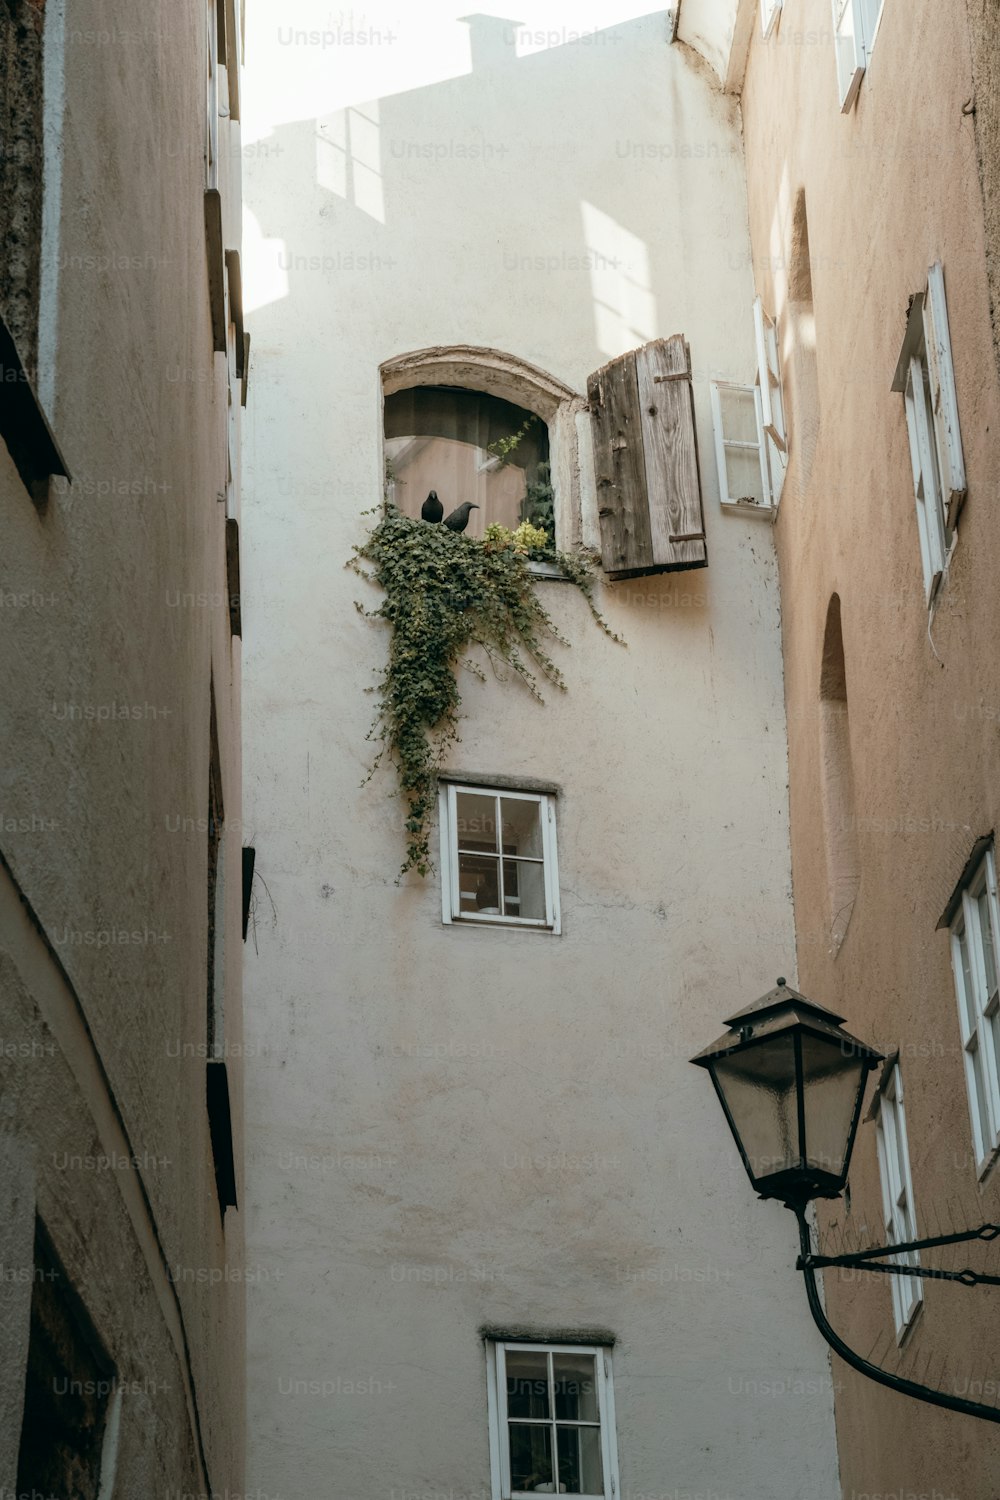 a tall building with a window and a plant growing out of it